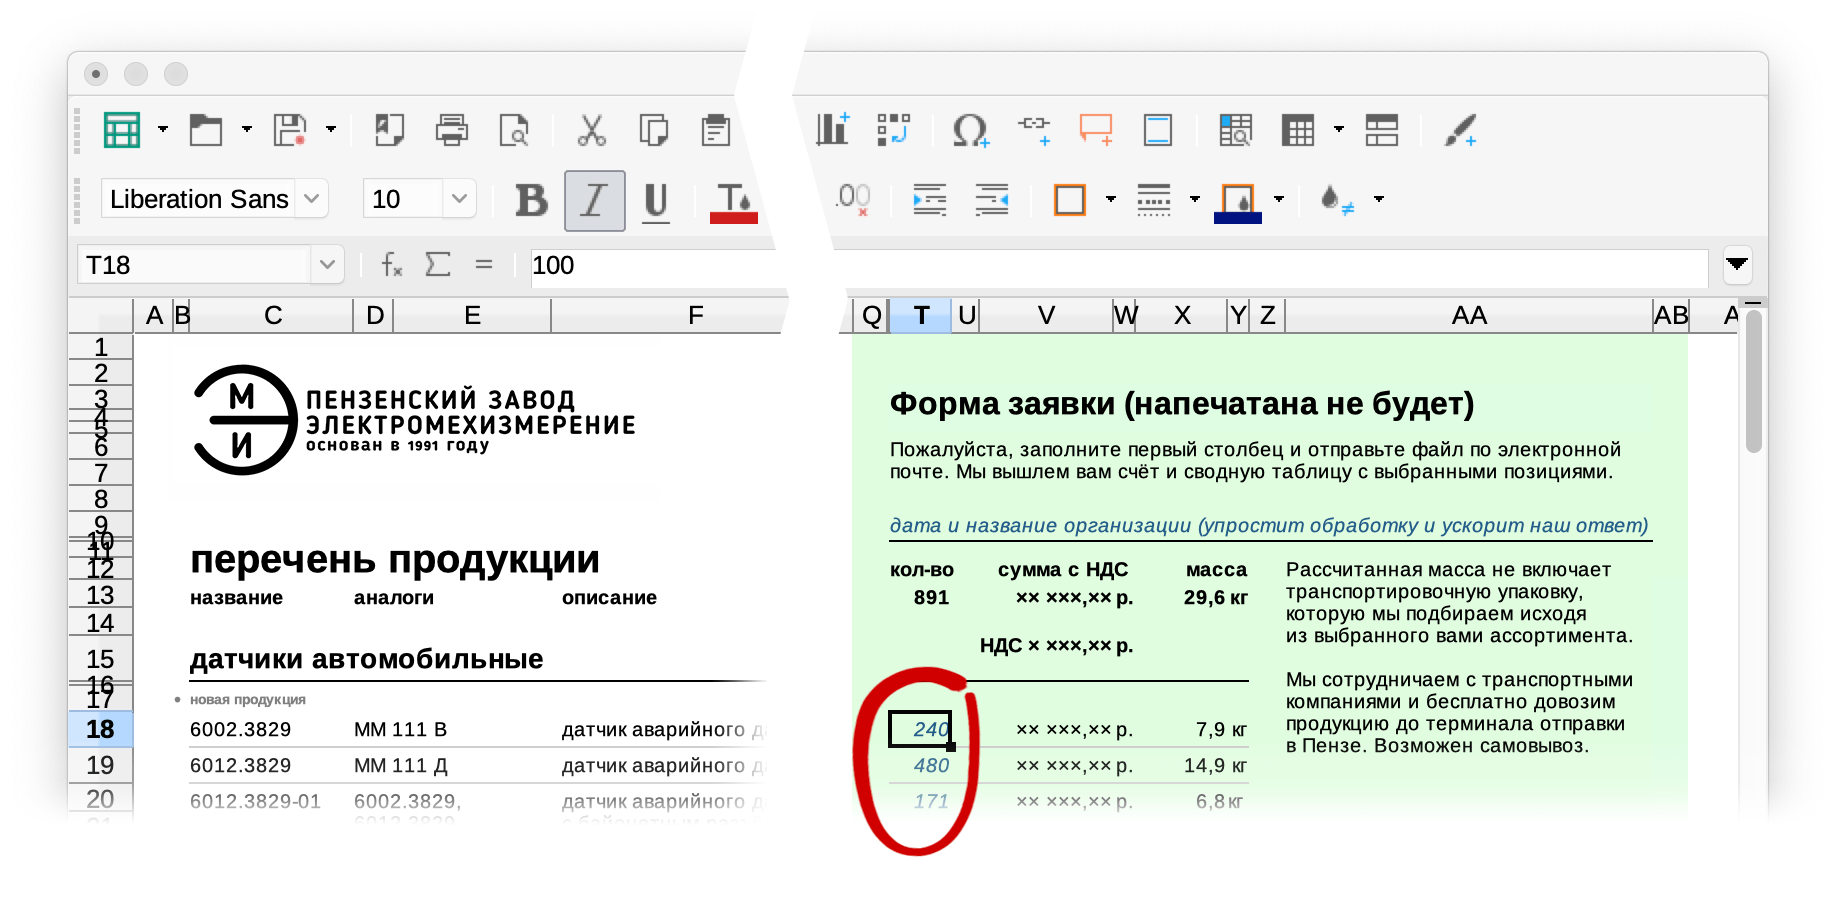 Order application form opened in LibreOffice